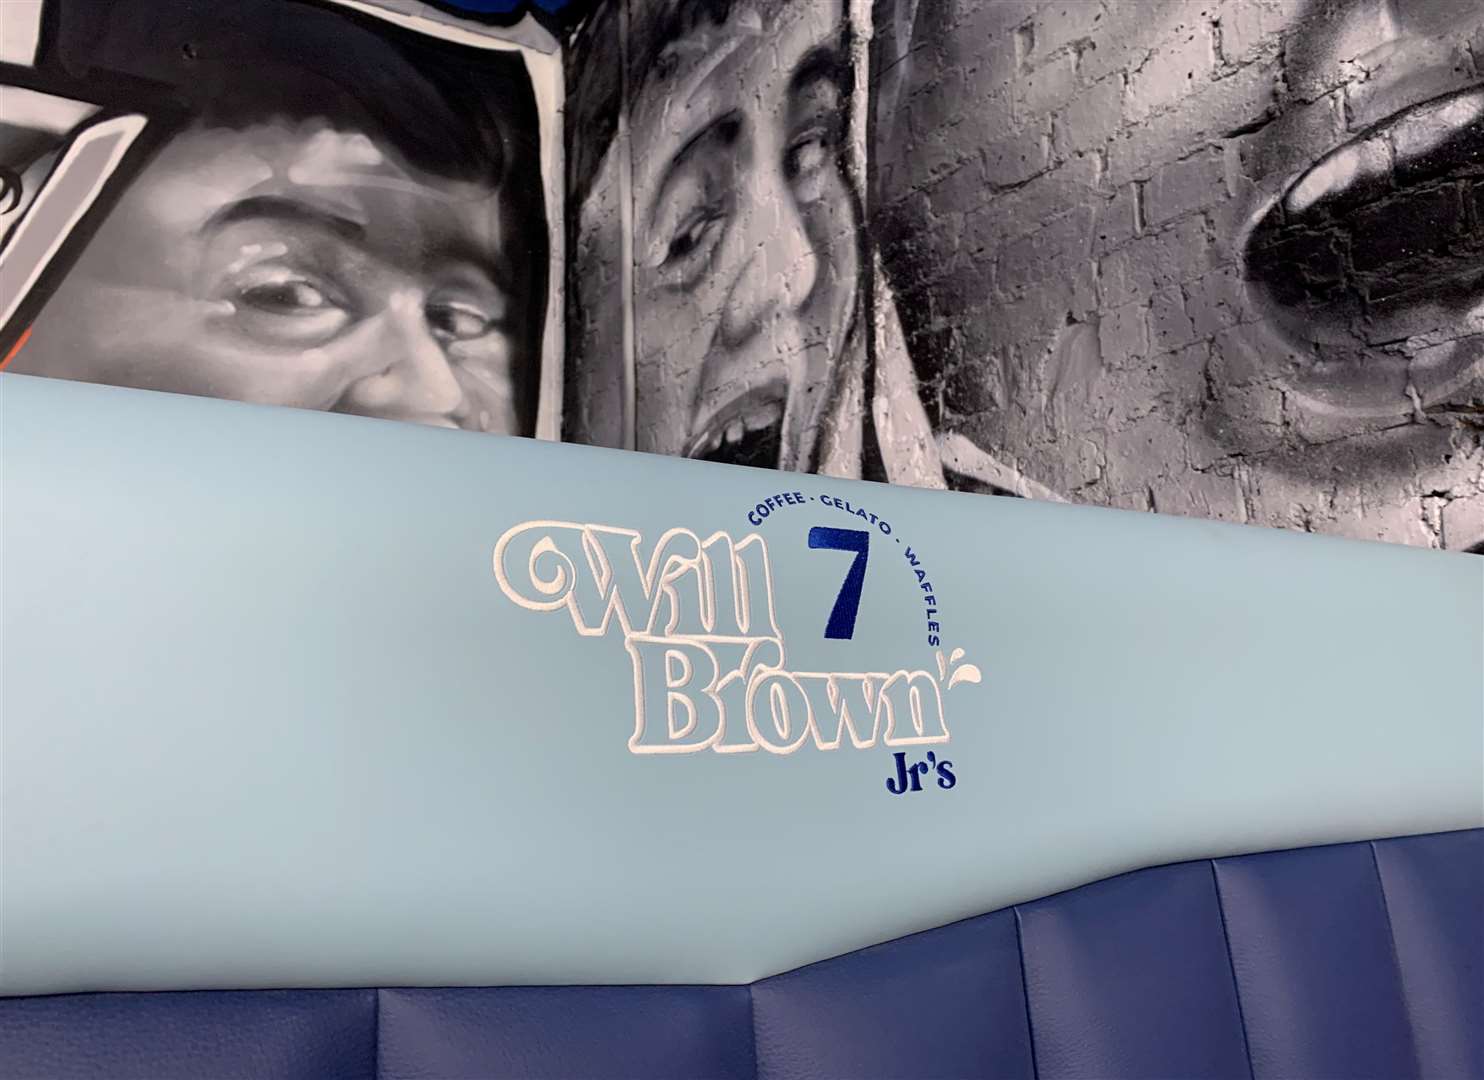 The shop in Folkestone will be called Will Brown Jr's